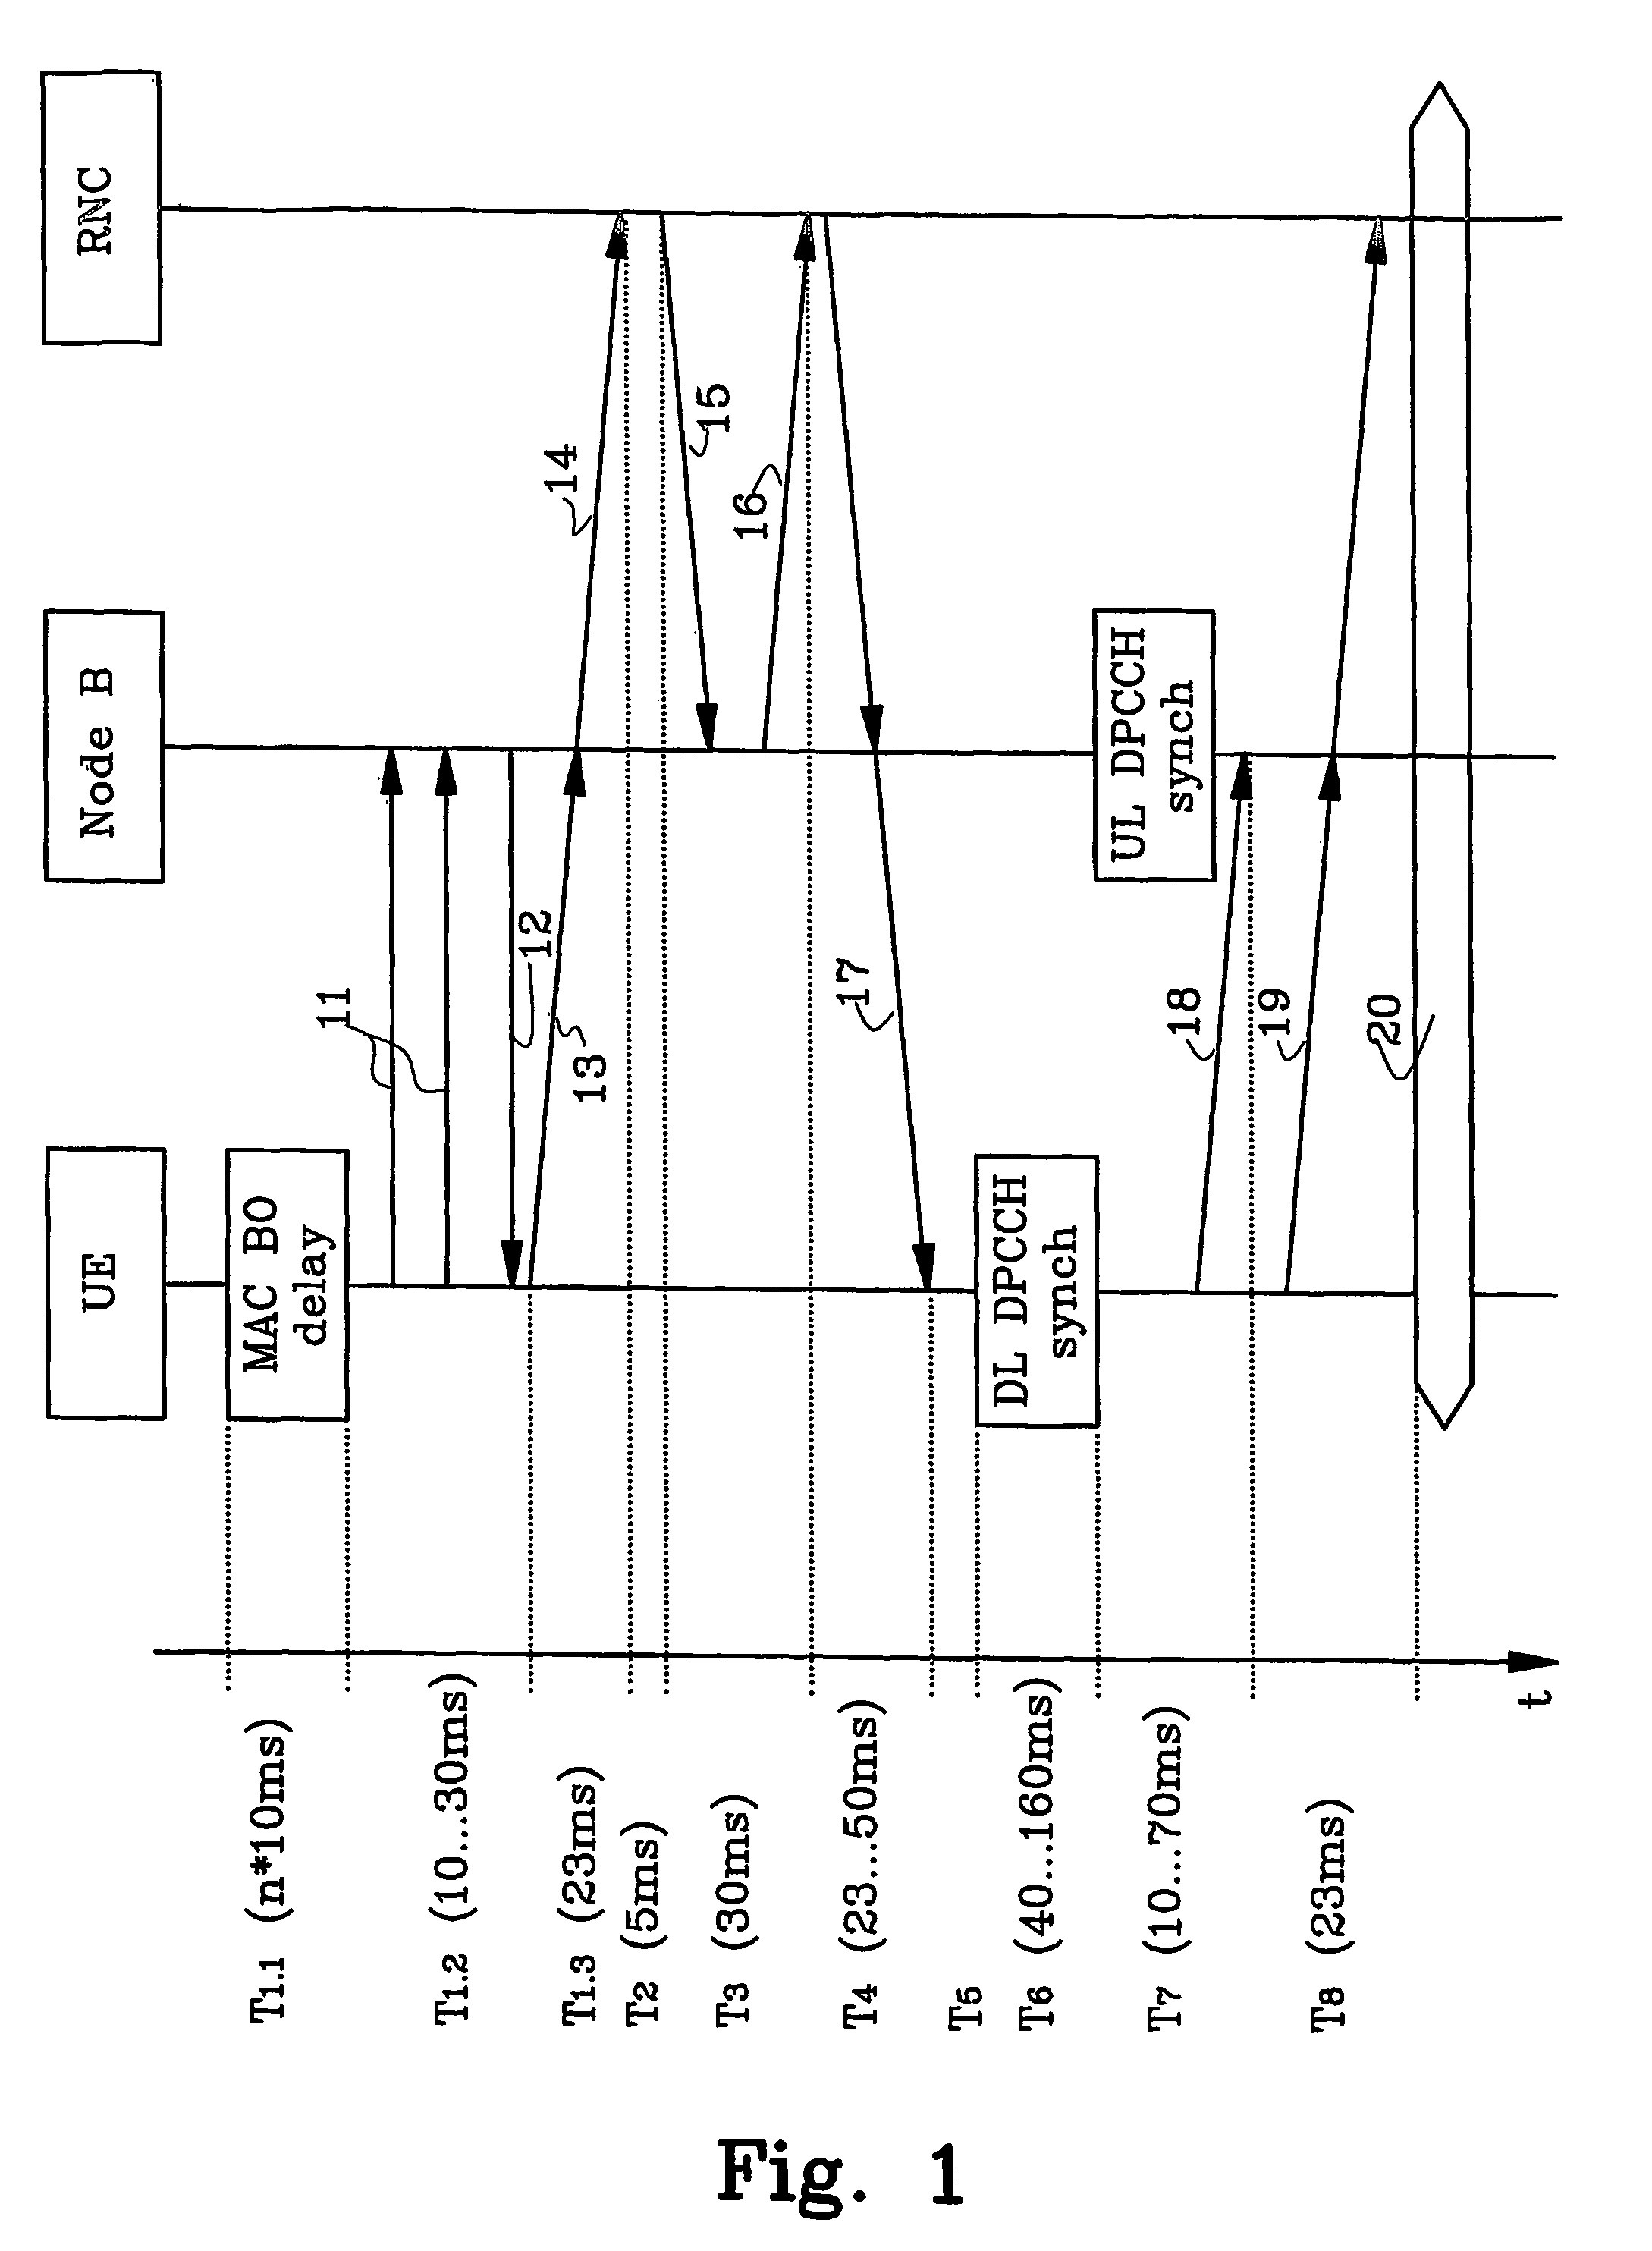 Fast setup of physical communication channels